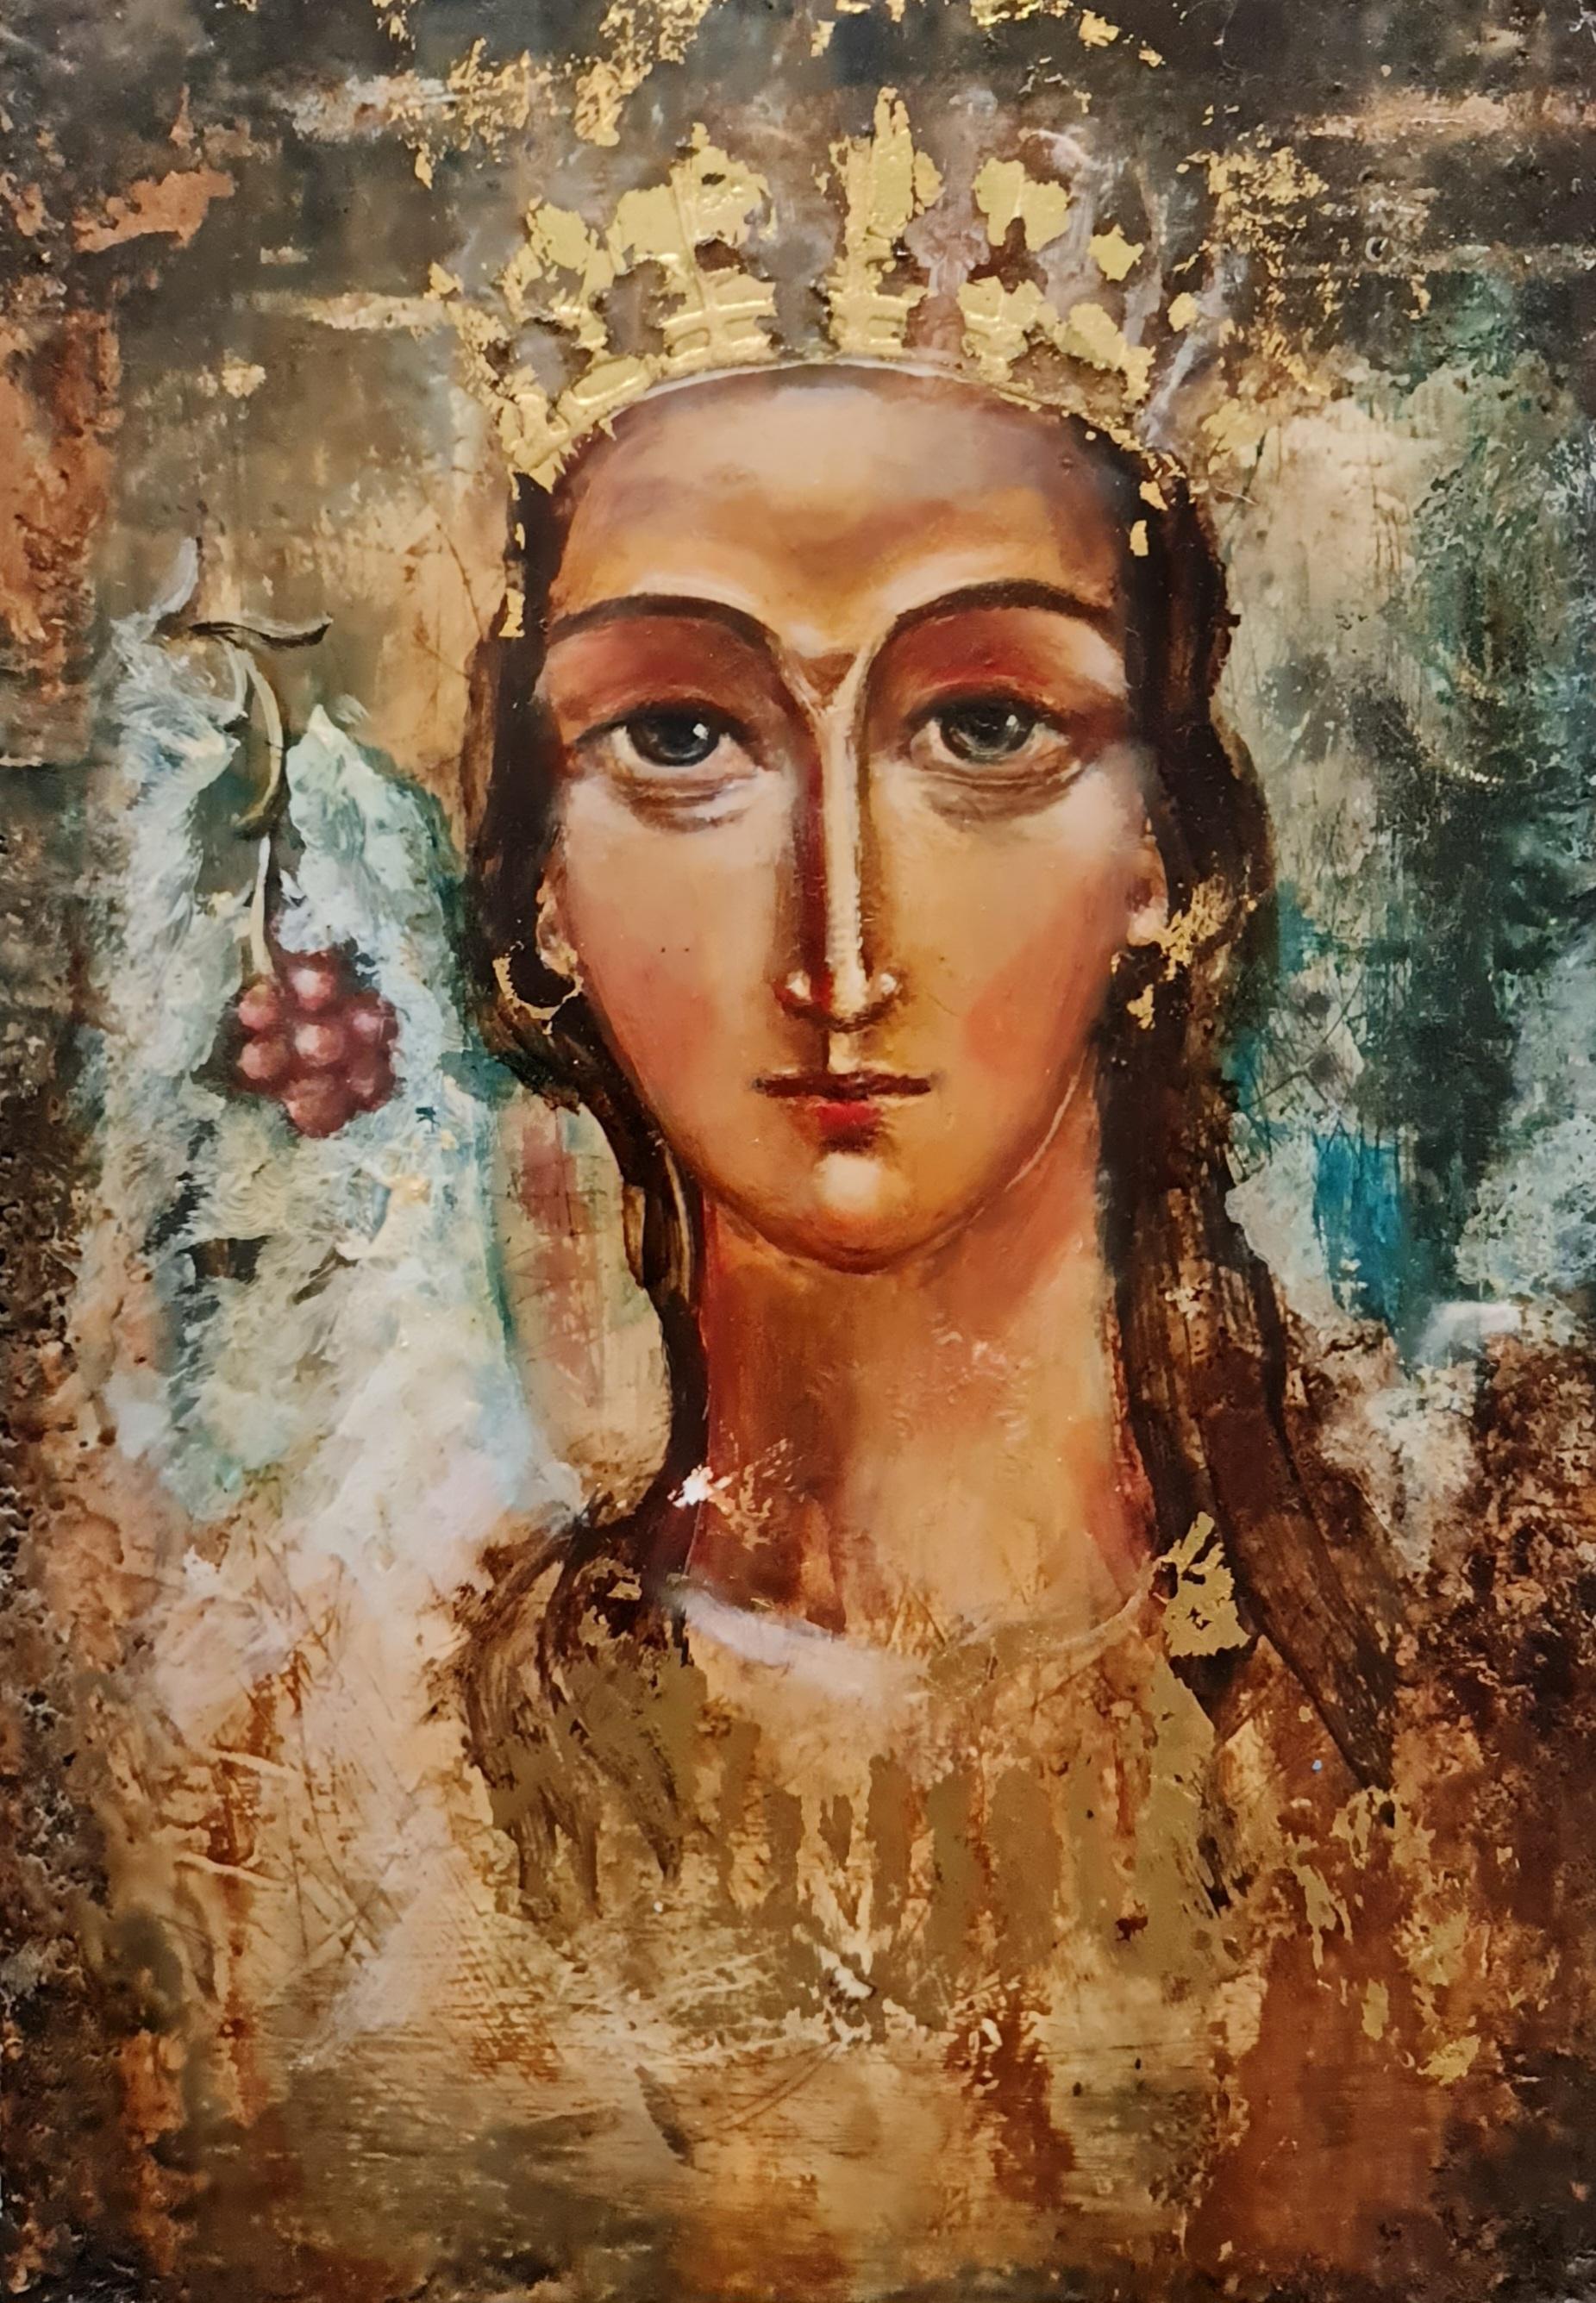 Natalie Shiporina Portrait Painting - painting in antique style on a wooden panel "Magic image"